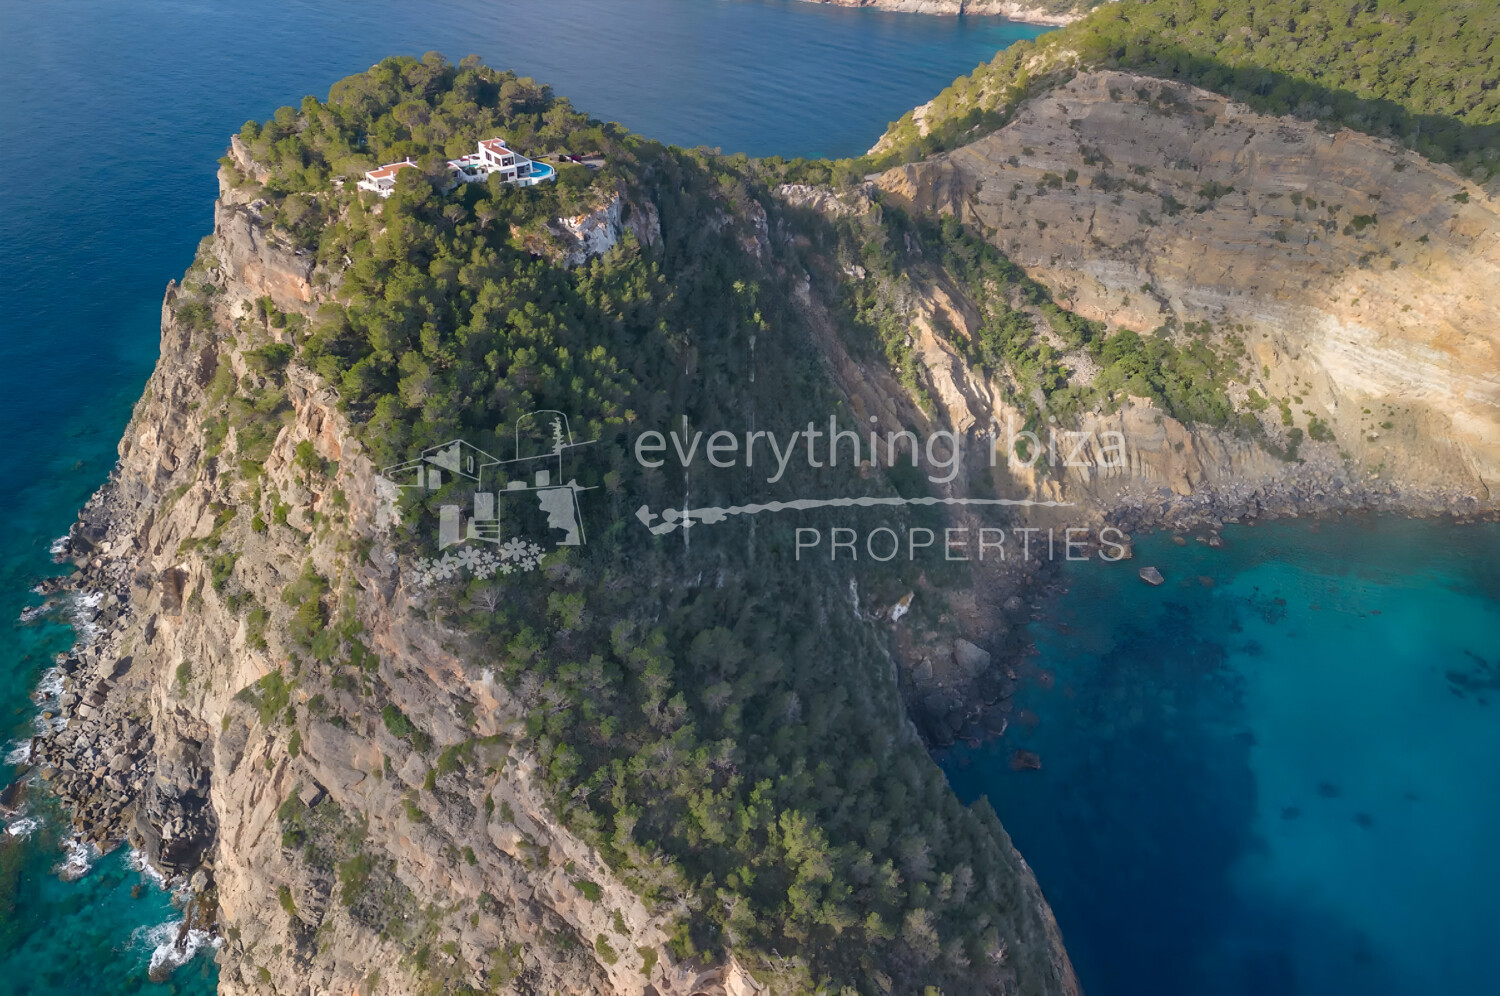 Private Paradise Estate with 360º Panoramic Views and Direct Access to Sea, ref. 1684, for sale in Ibiza by everything ibiza Properties